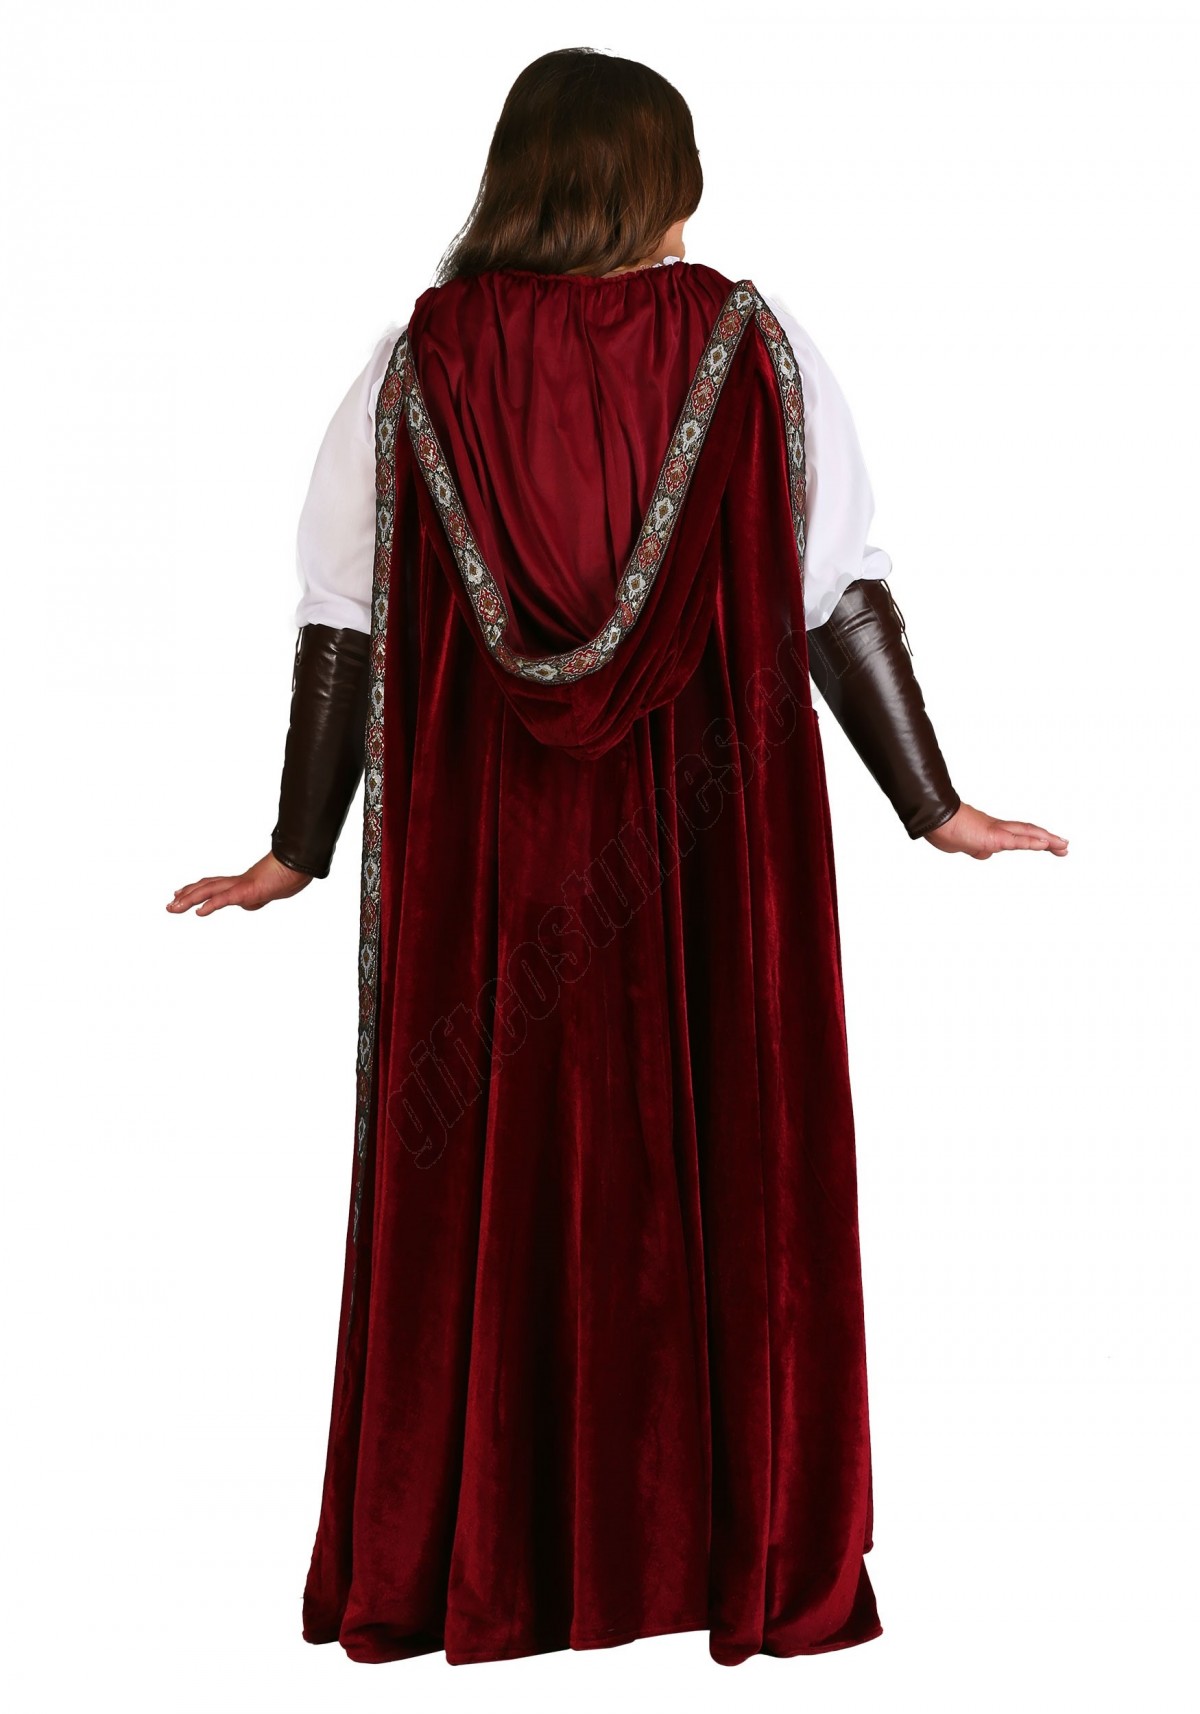 Deluxe Red Riding Hood Plus Size Costume Promotions - -2